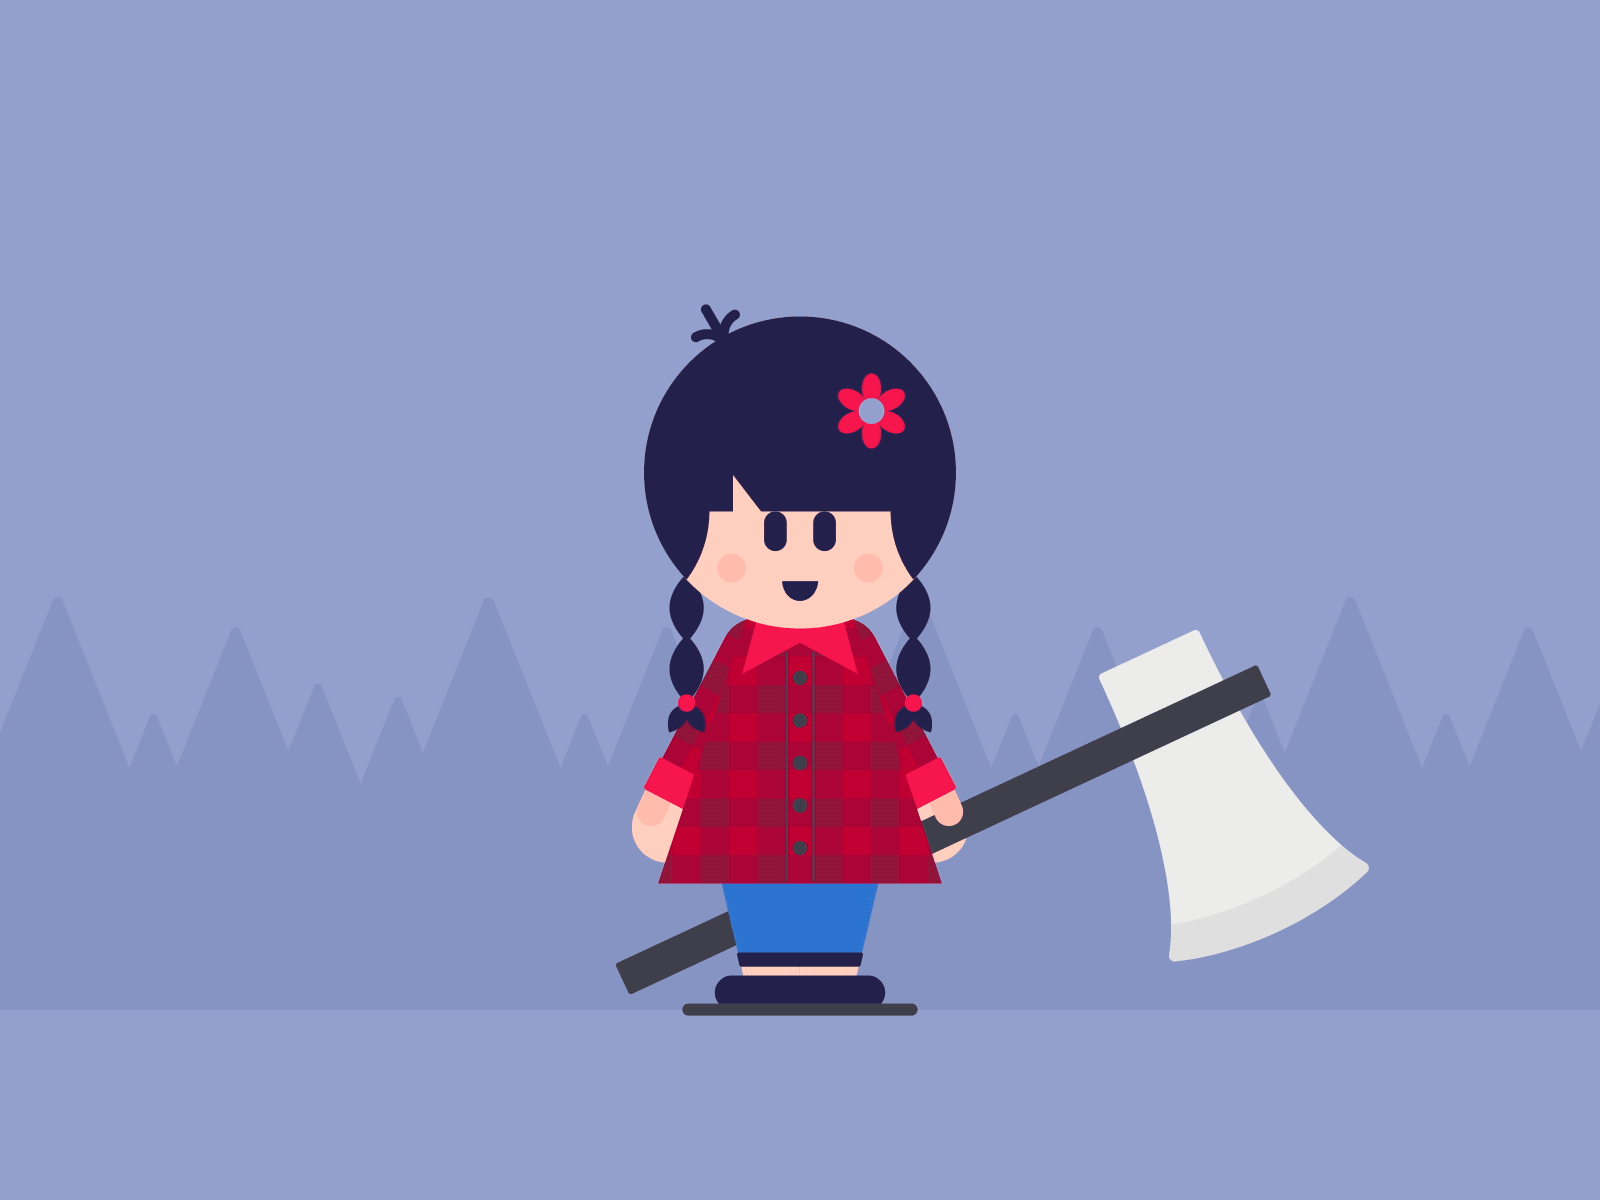 LITTLE LUMBERJACK animation animation 2d animation after effects character design characters children design girl girl character hello illustration lumberjack